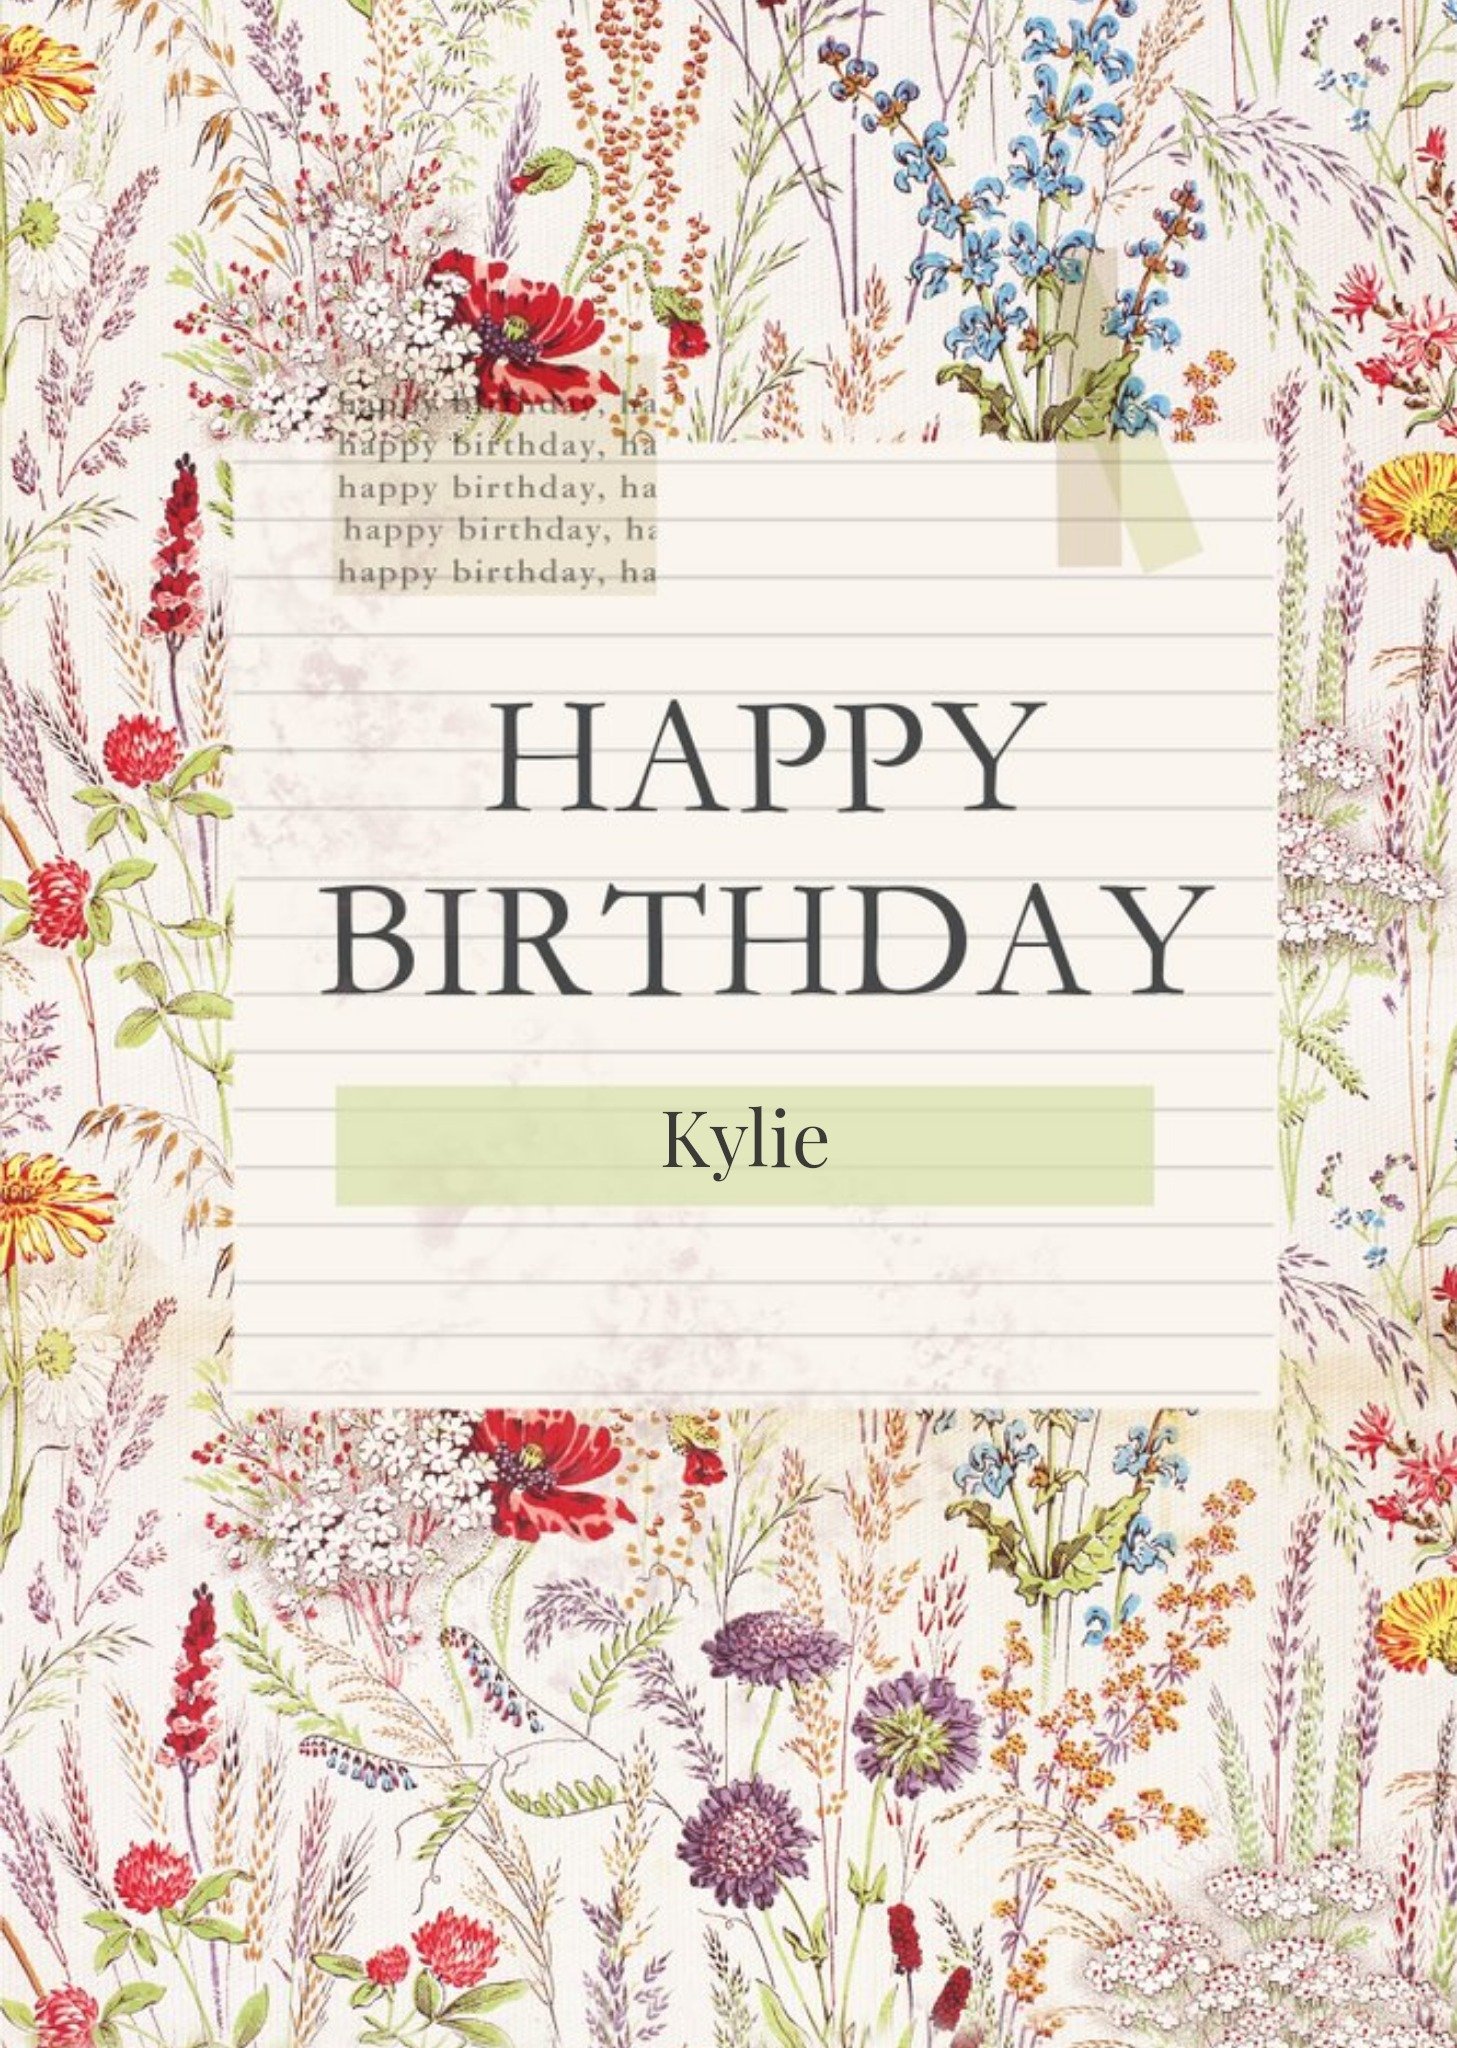 The V&a V&a Floral Pattern Collage Birthday Card Ecard